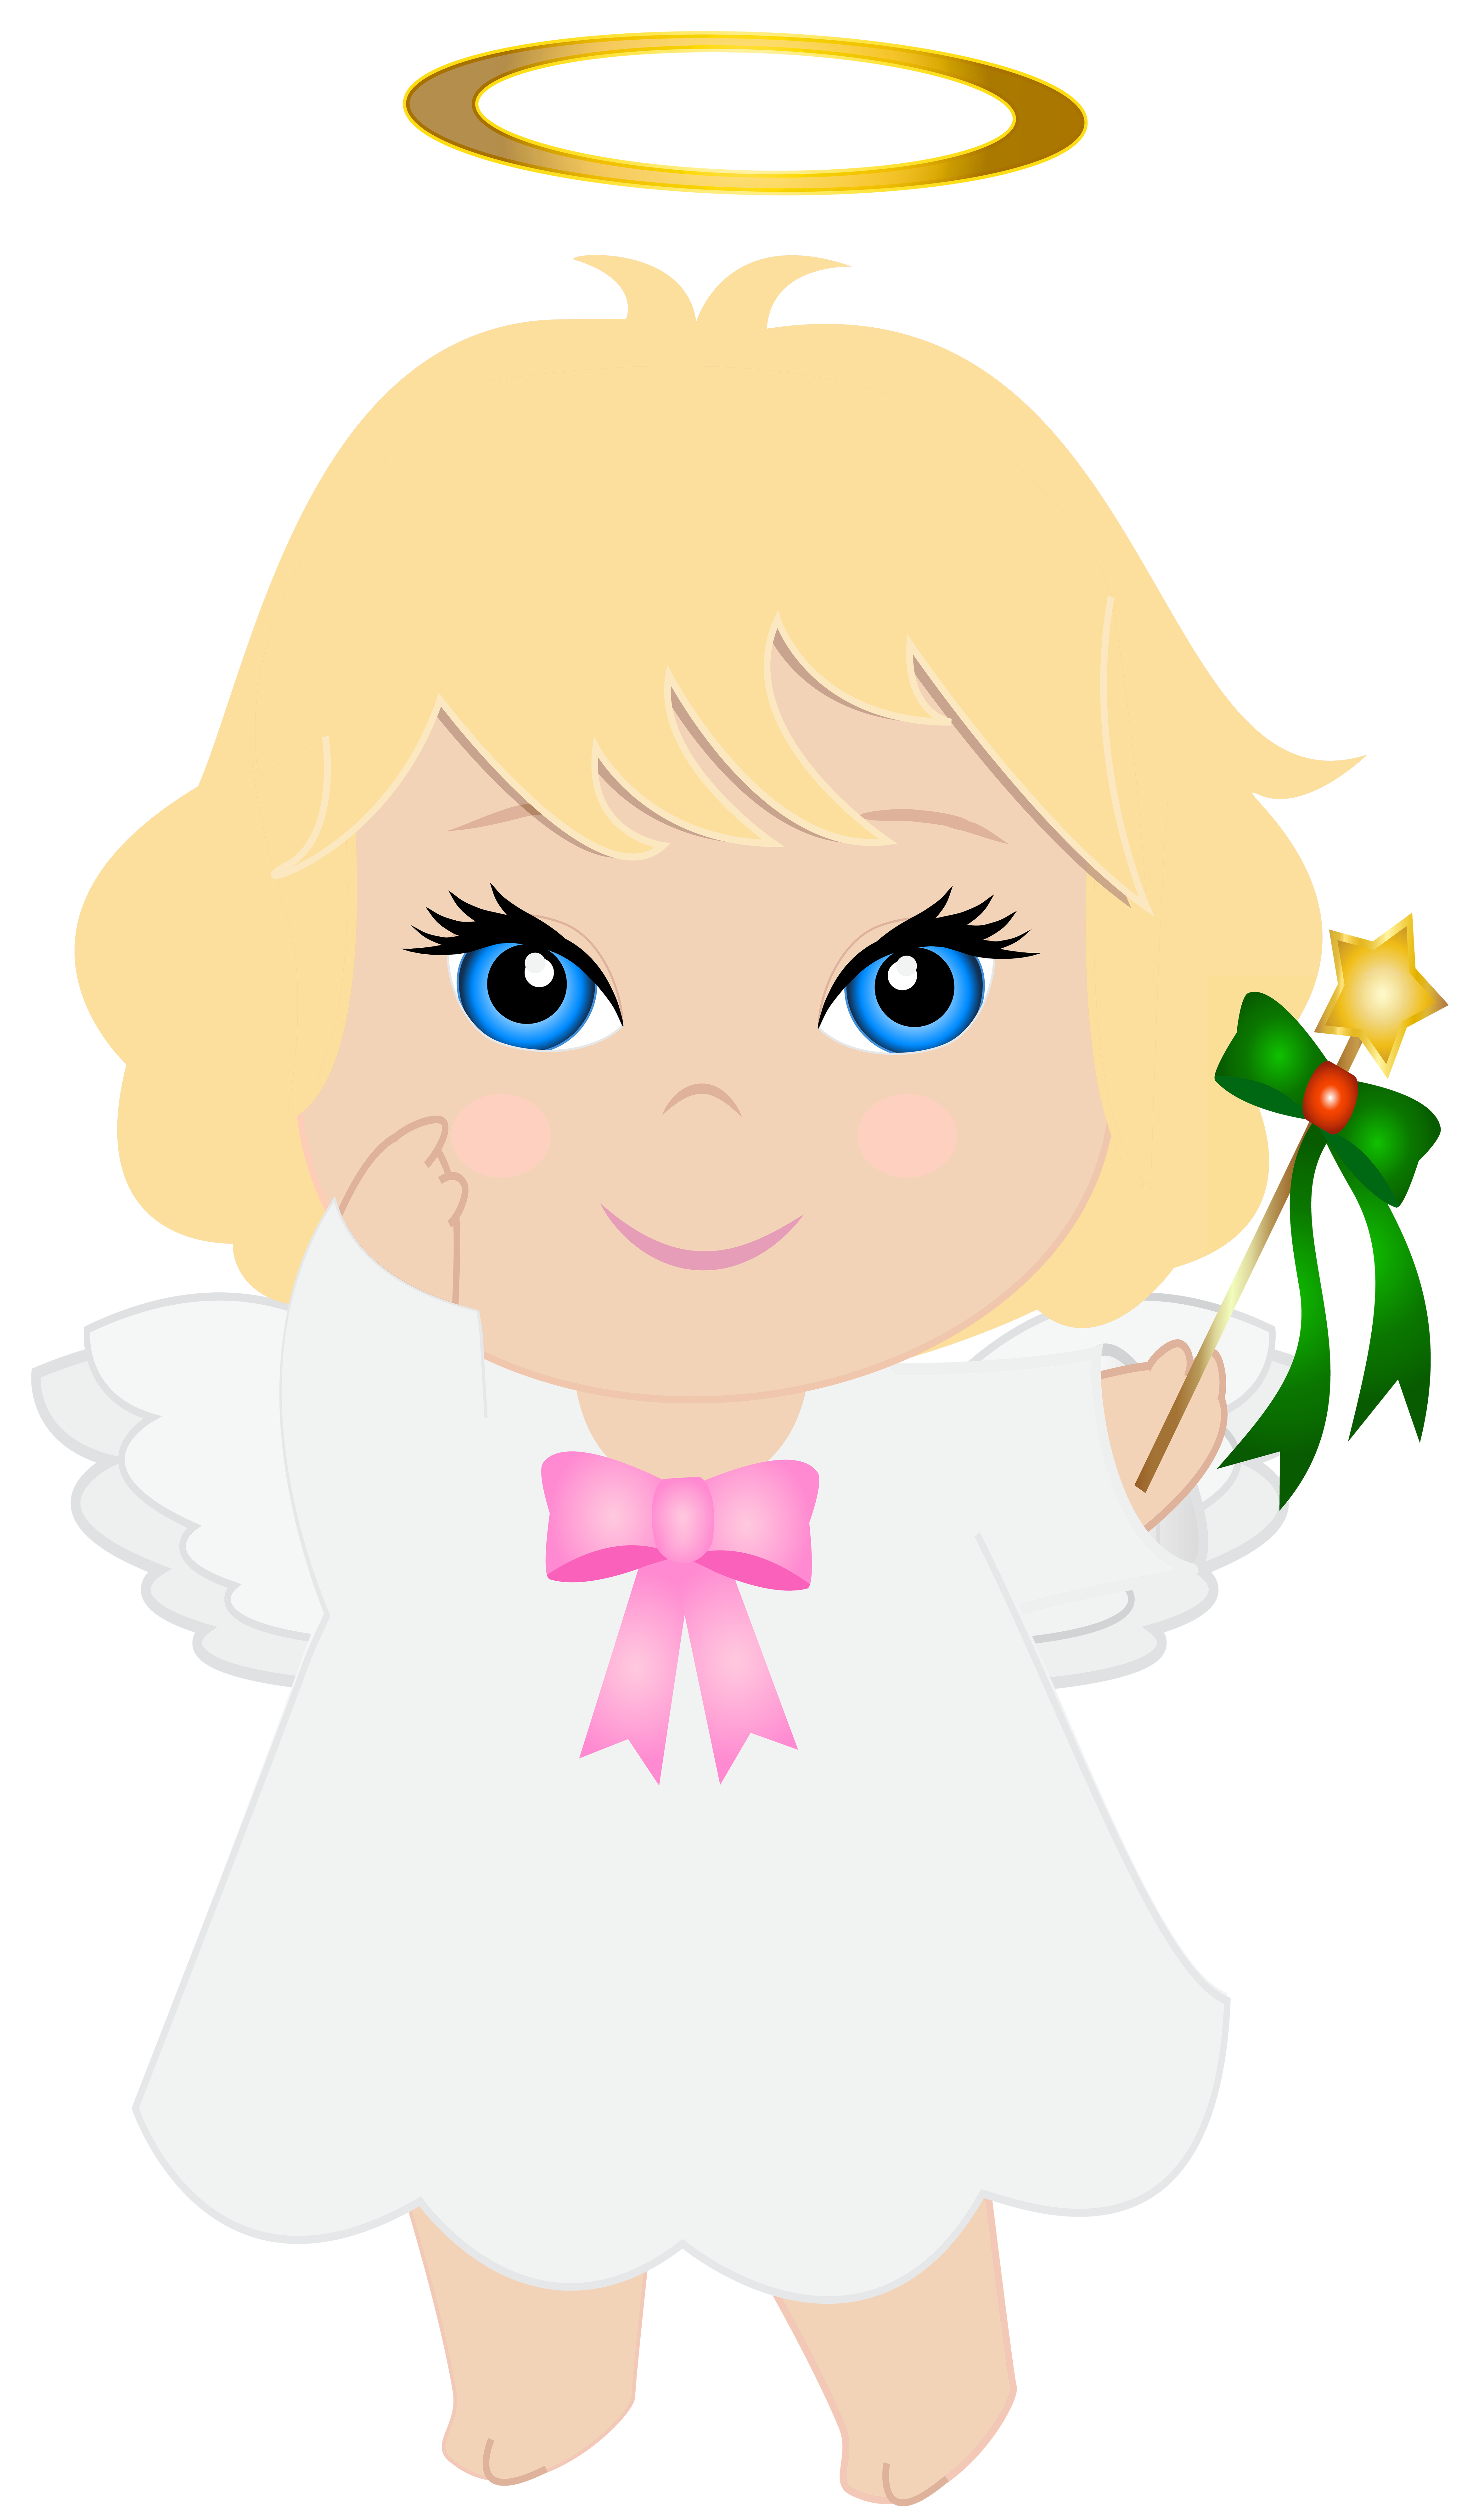 Baby Angel Clip Art PNG Image | Gallery Yopriceville - High-Quality ...